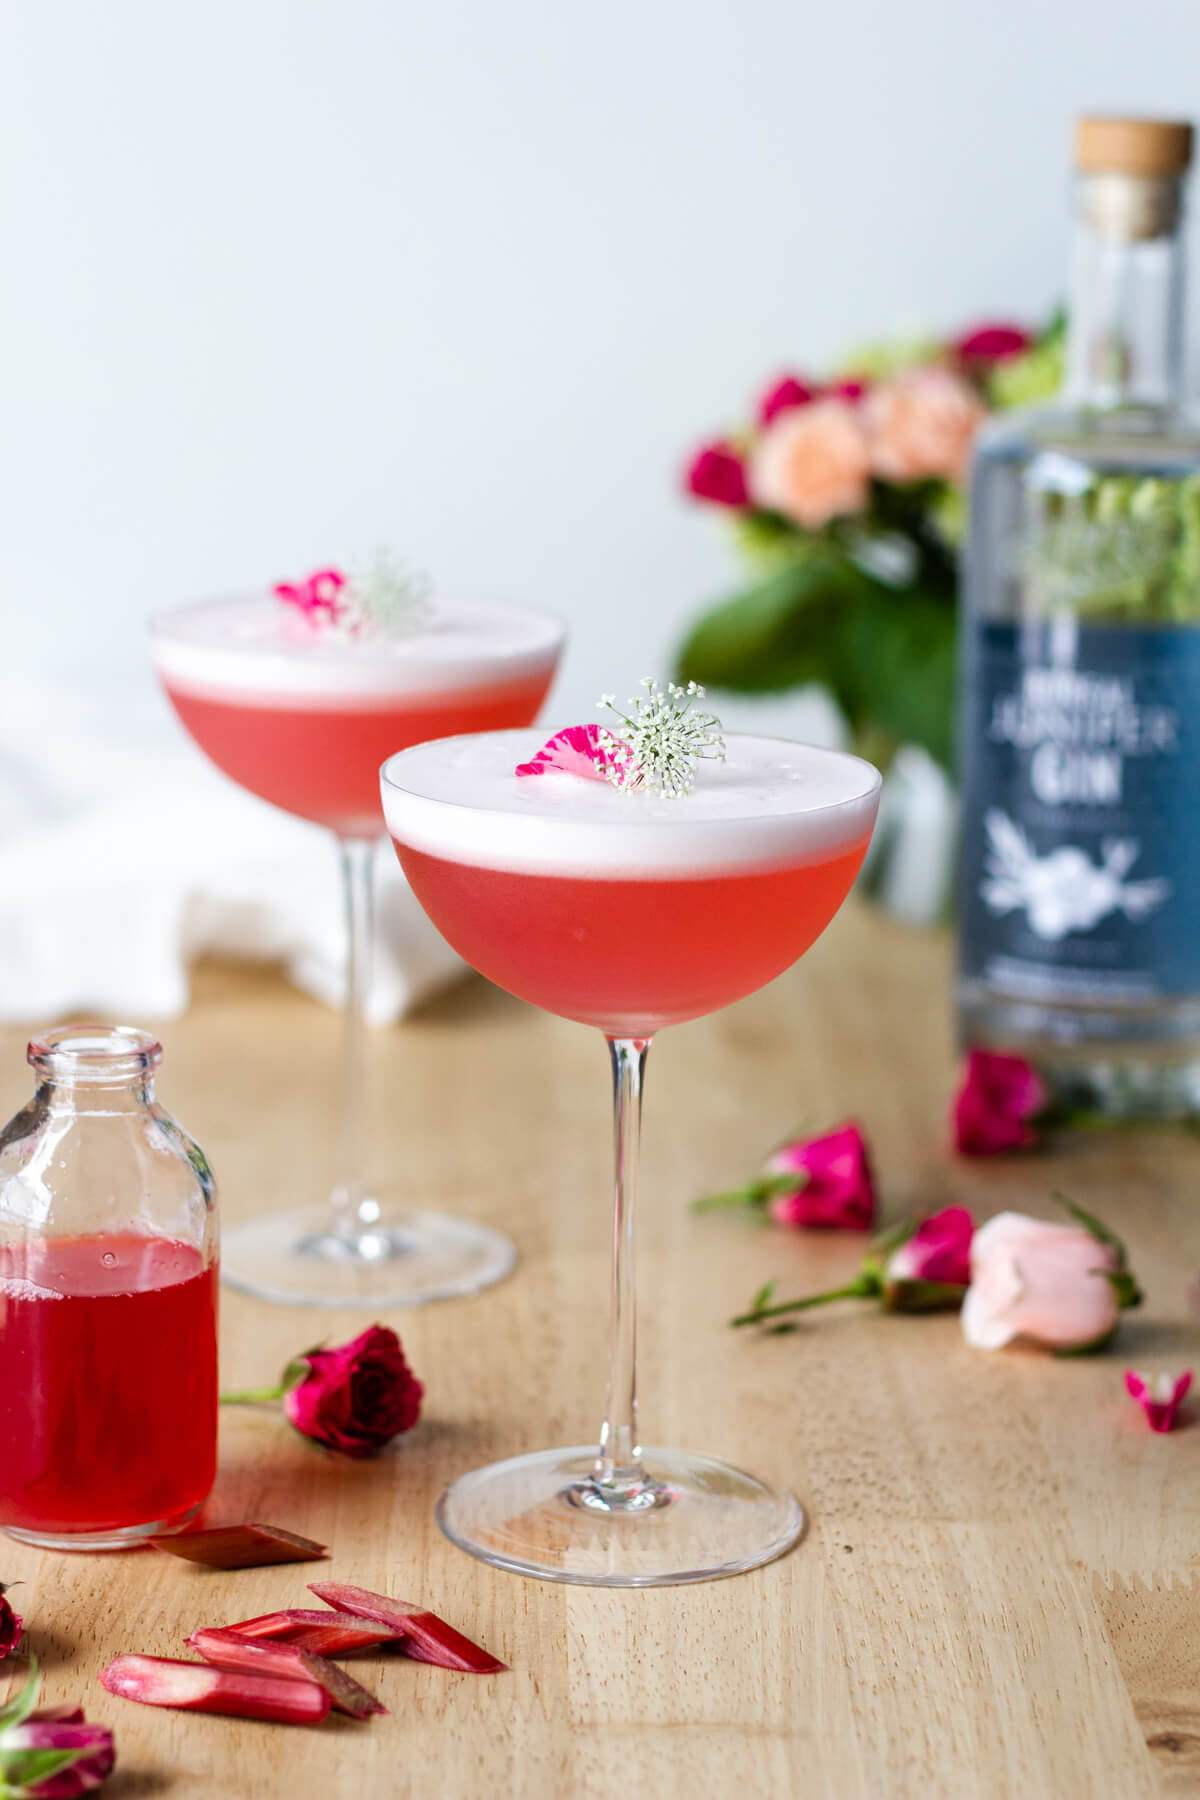 The Rhubarb Rose Gin Sour makes for a refreshingly beautiful cocktail. This is a fun way to use up all of those rhubarb plants growing in your garden. Cocktail recipe at www.designsofanykind.com